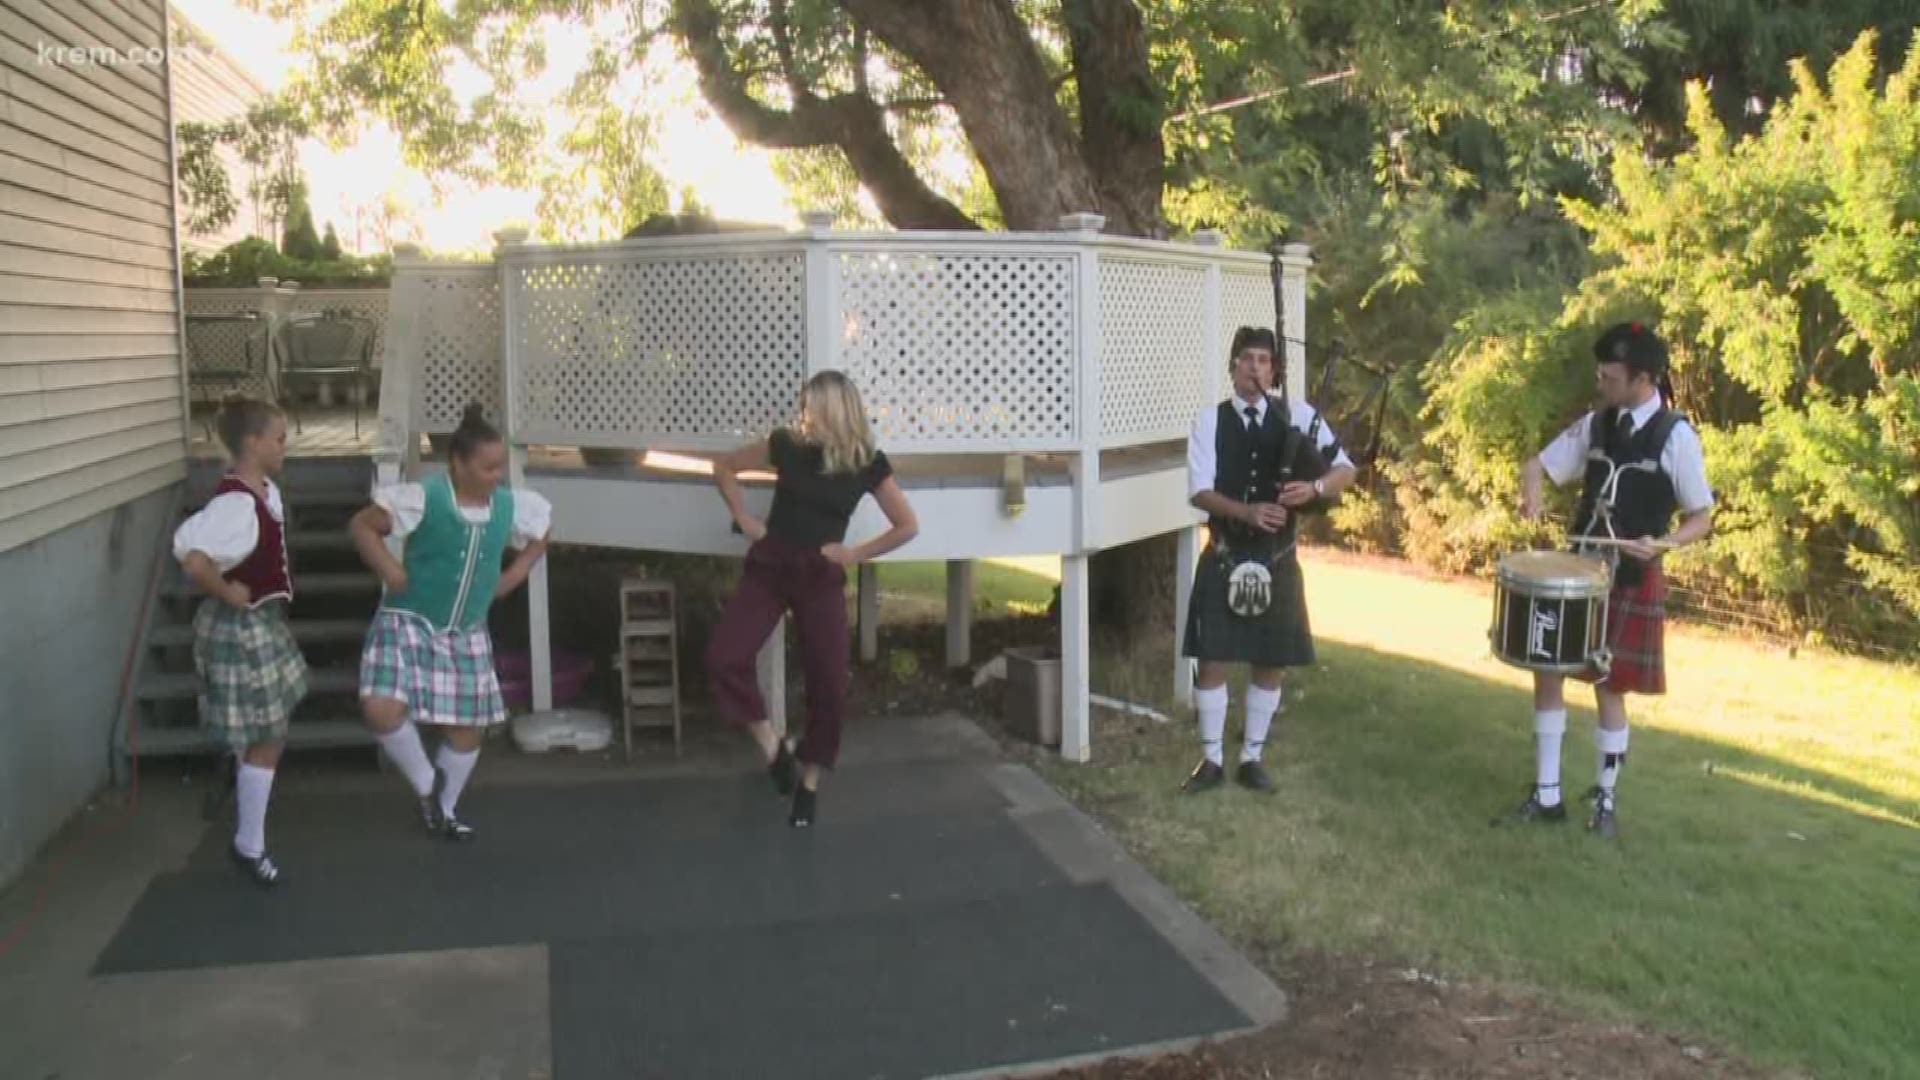 KREM's Danamarie McNicholl, Jen York, and Evan Noorani chat with Sean Pelfrey about the upcoming Scottish Highland Games.